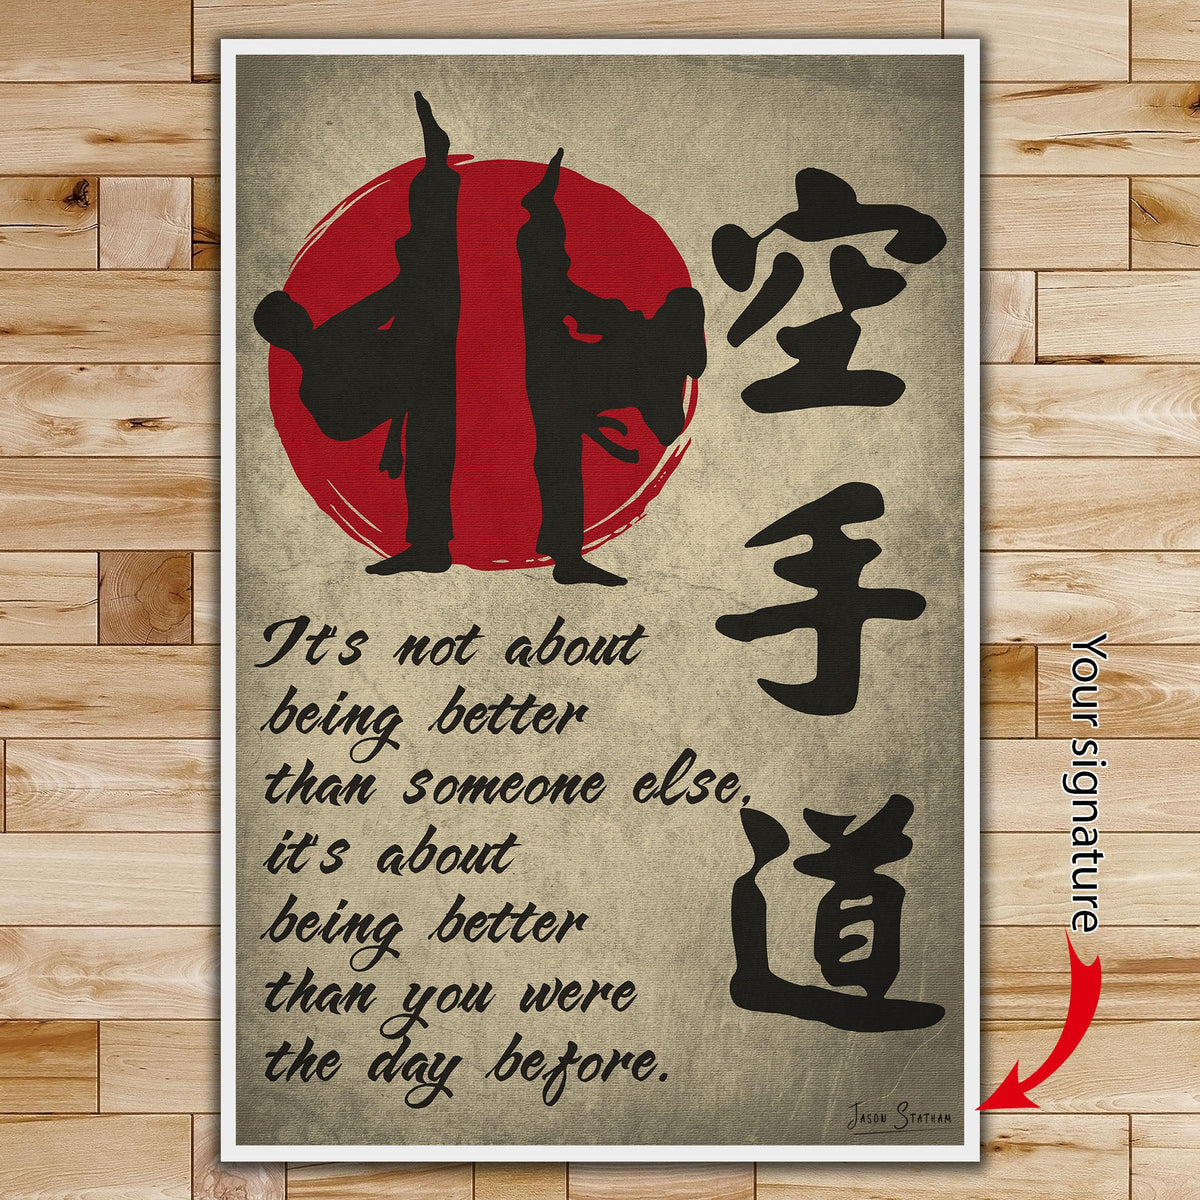 KA008 - It's About Being Better Than You Were The Day Before - Karatedo  - Vertical Poster - Vertical Canvas - Karate Poster